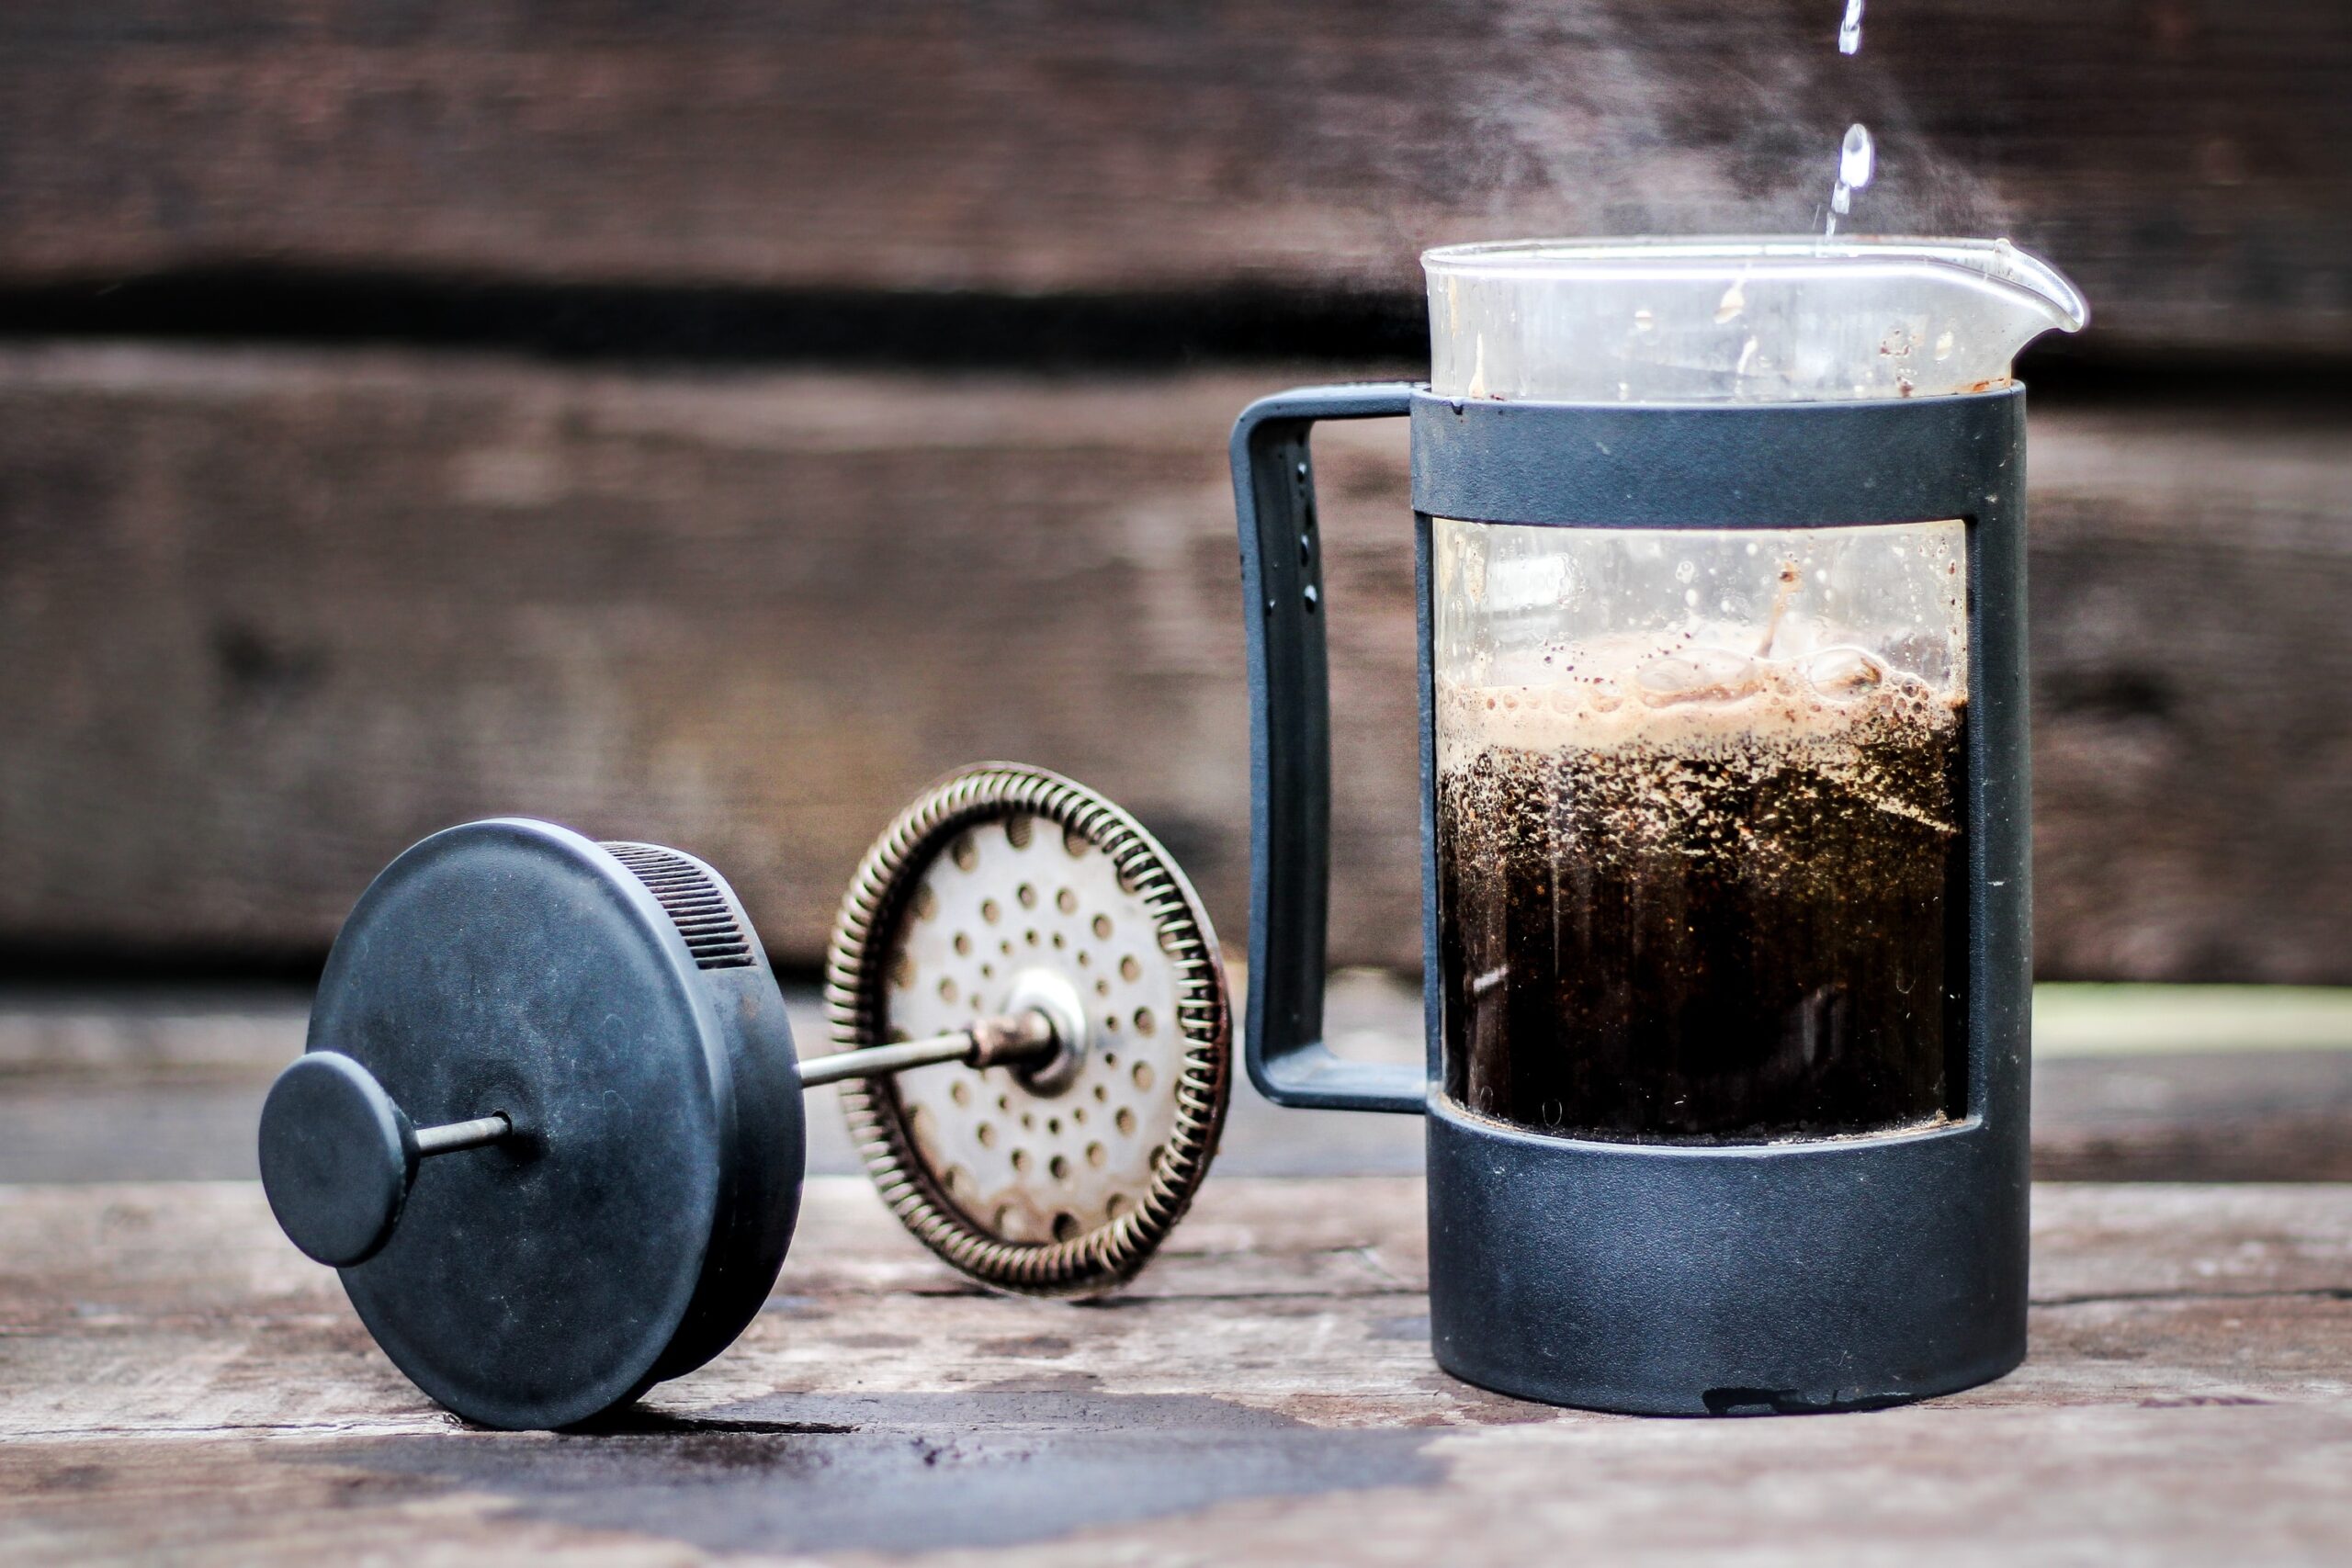 How To Make French Press Coffee